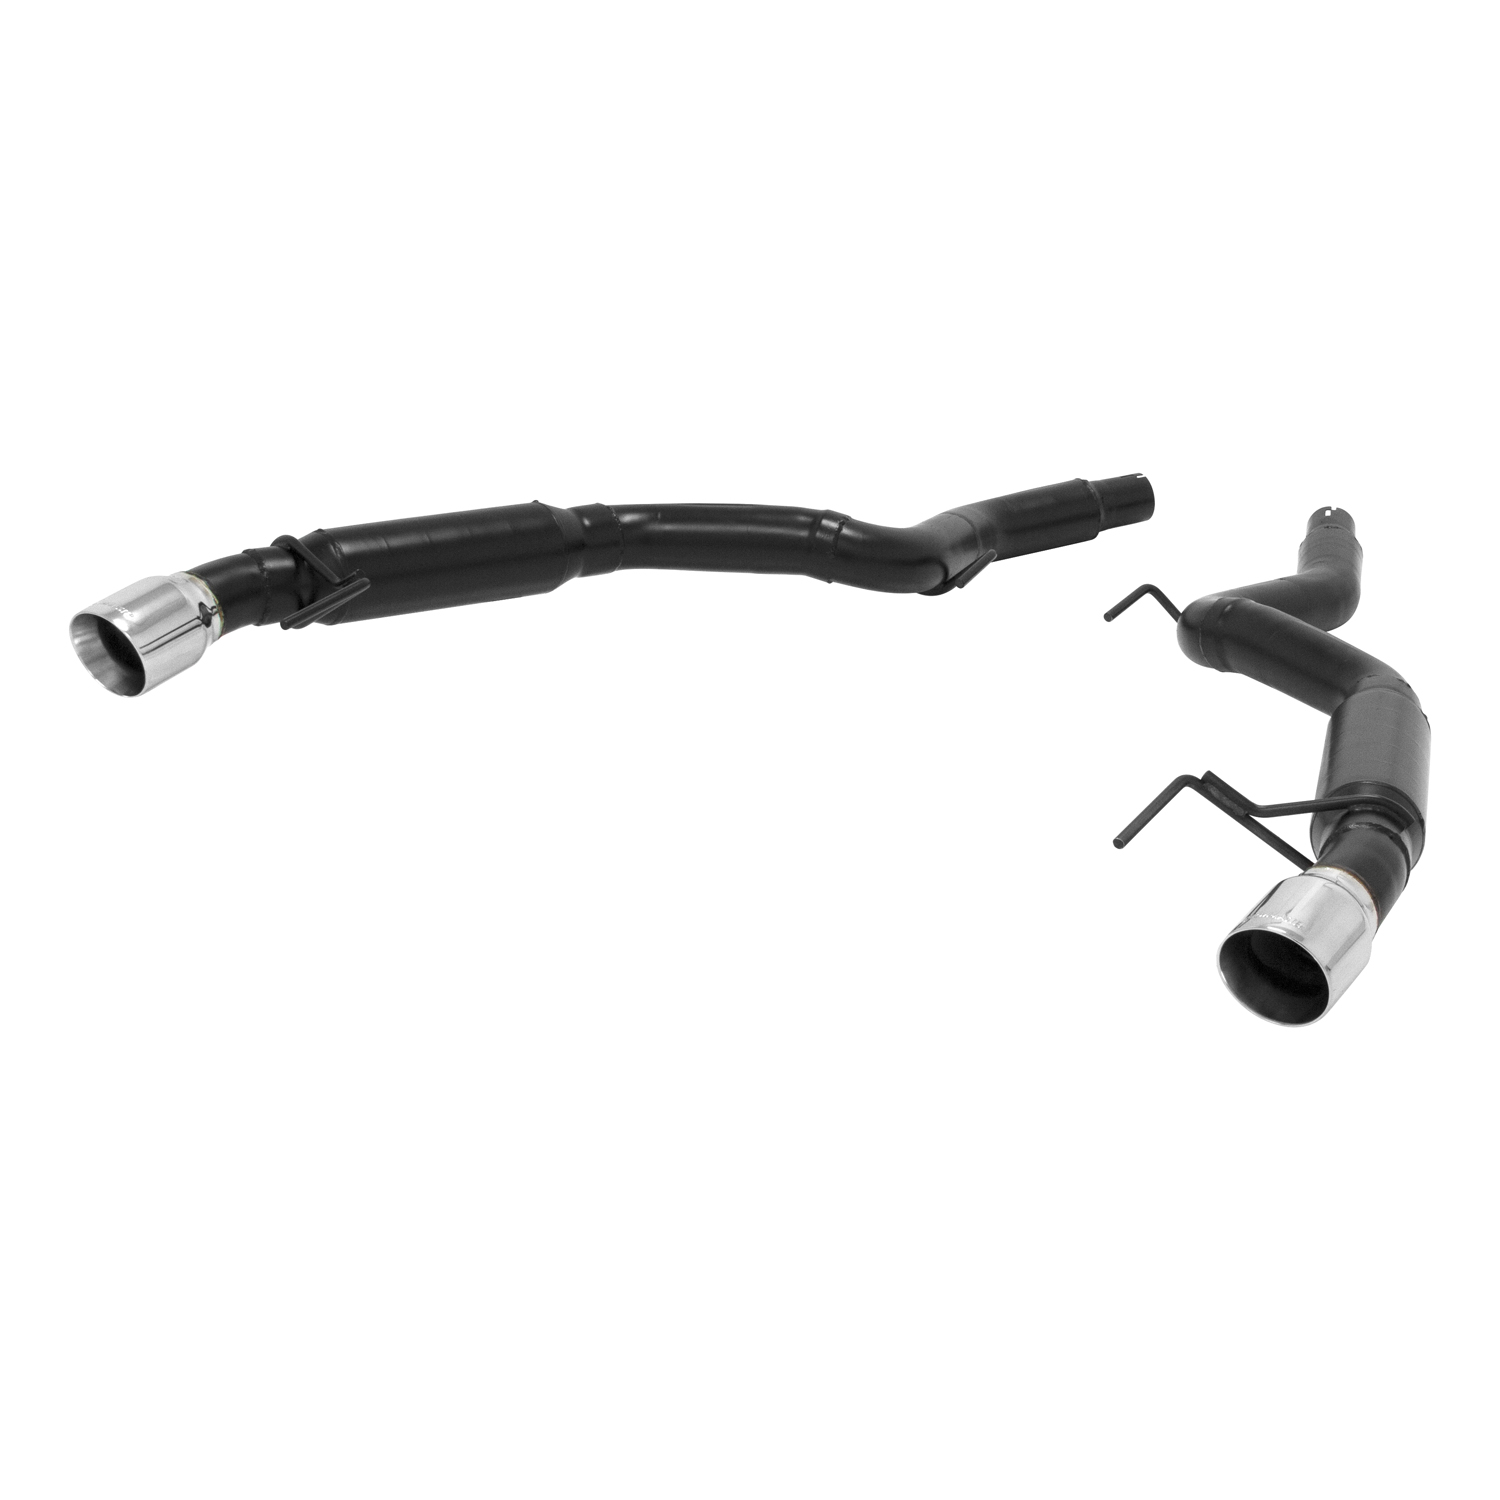 2015-2017 Ford Mustang GT 5.0L V8 Flowmaster Outlaw 409SS Axleback Exhaust System